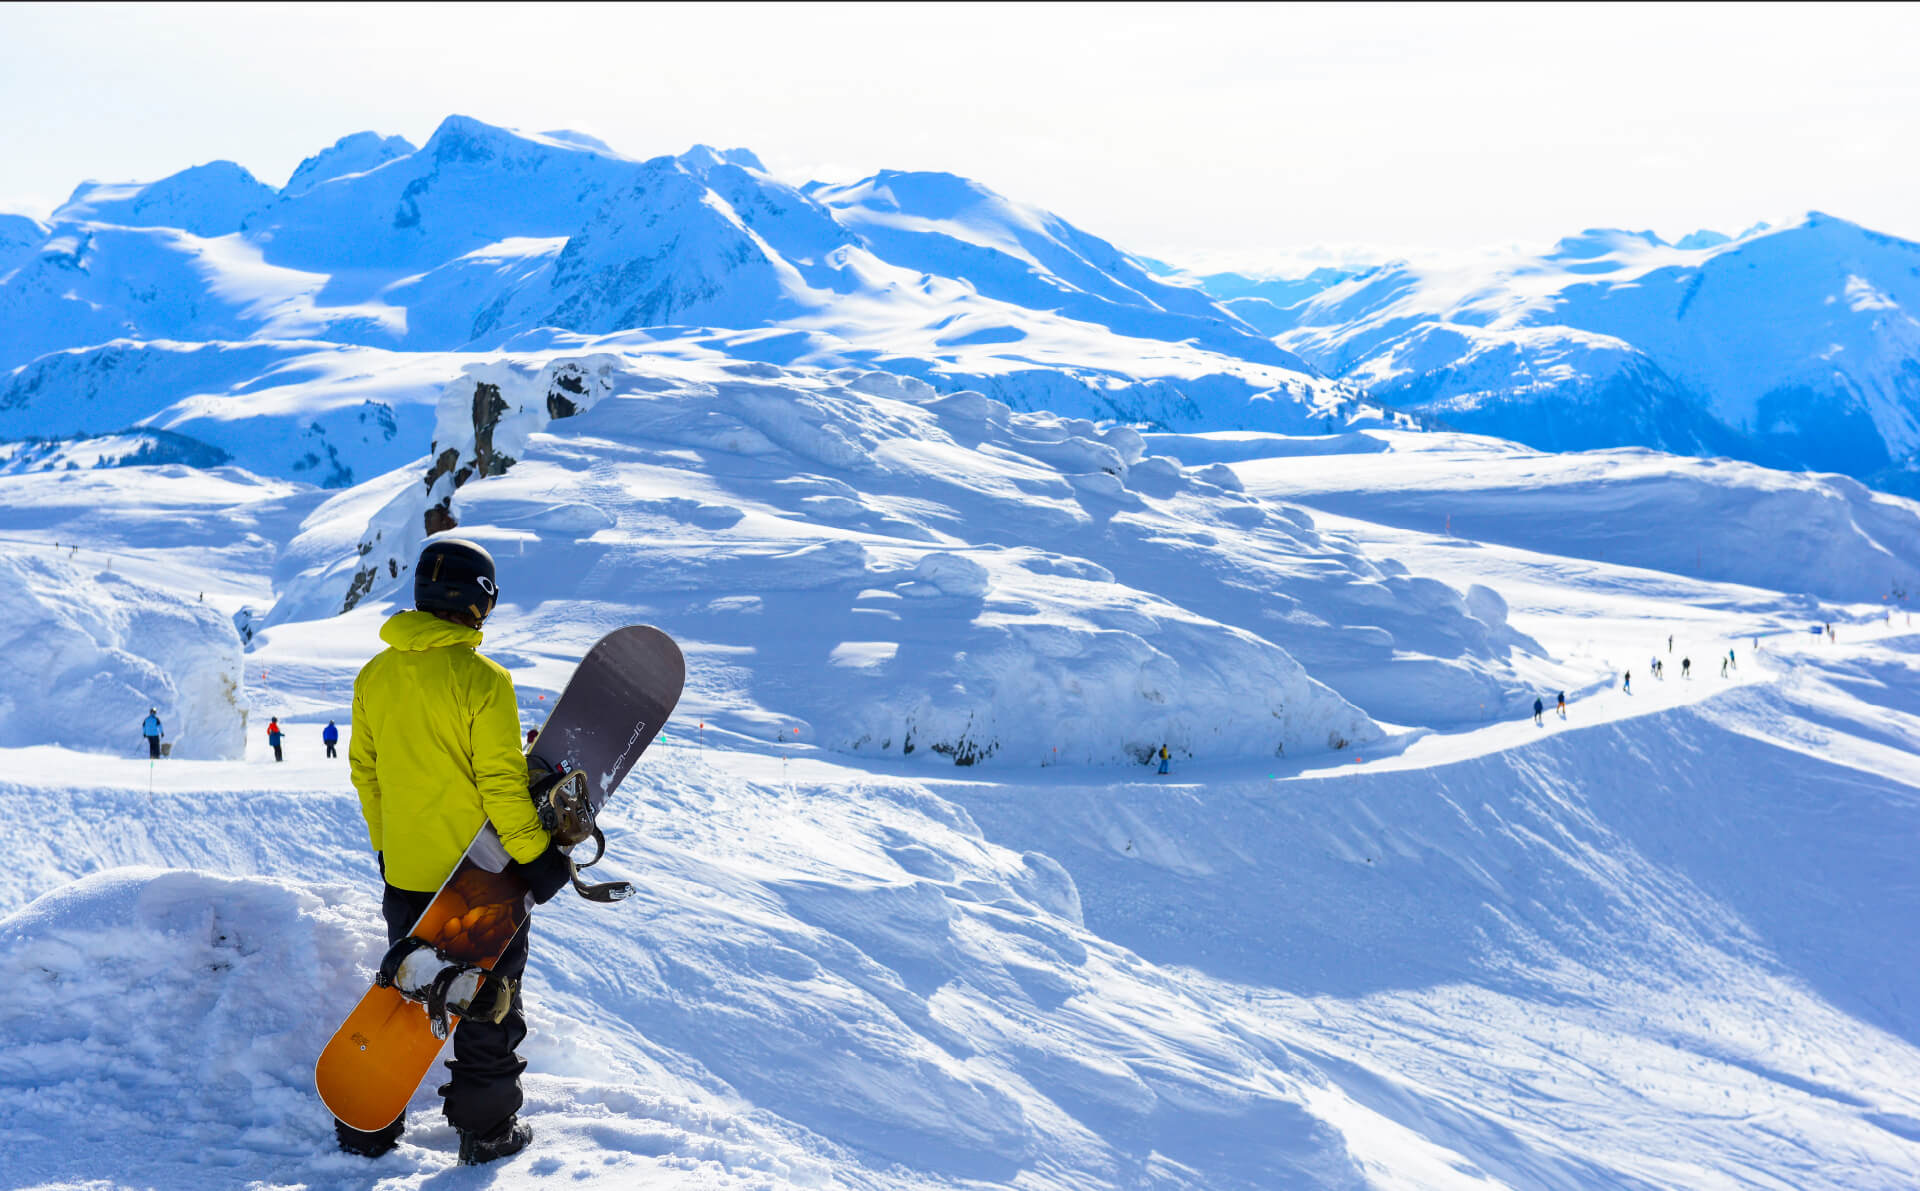 Snowboarder living the dream at Whistler Blackcomb